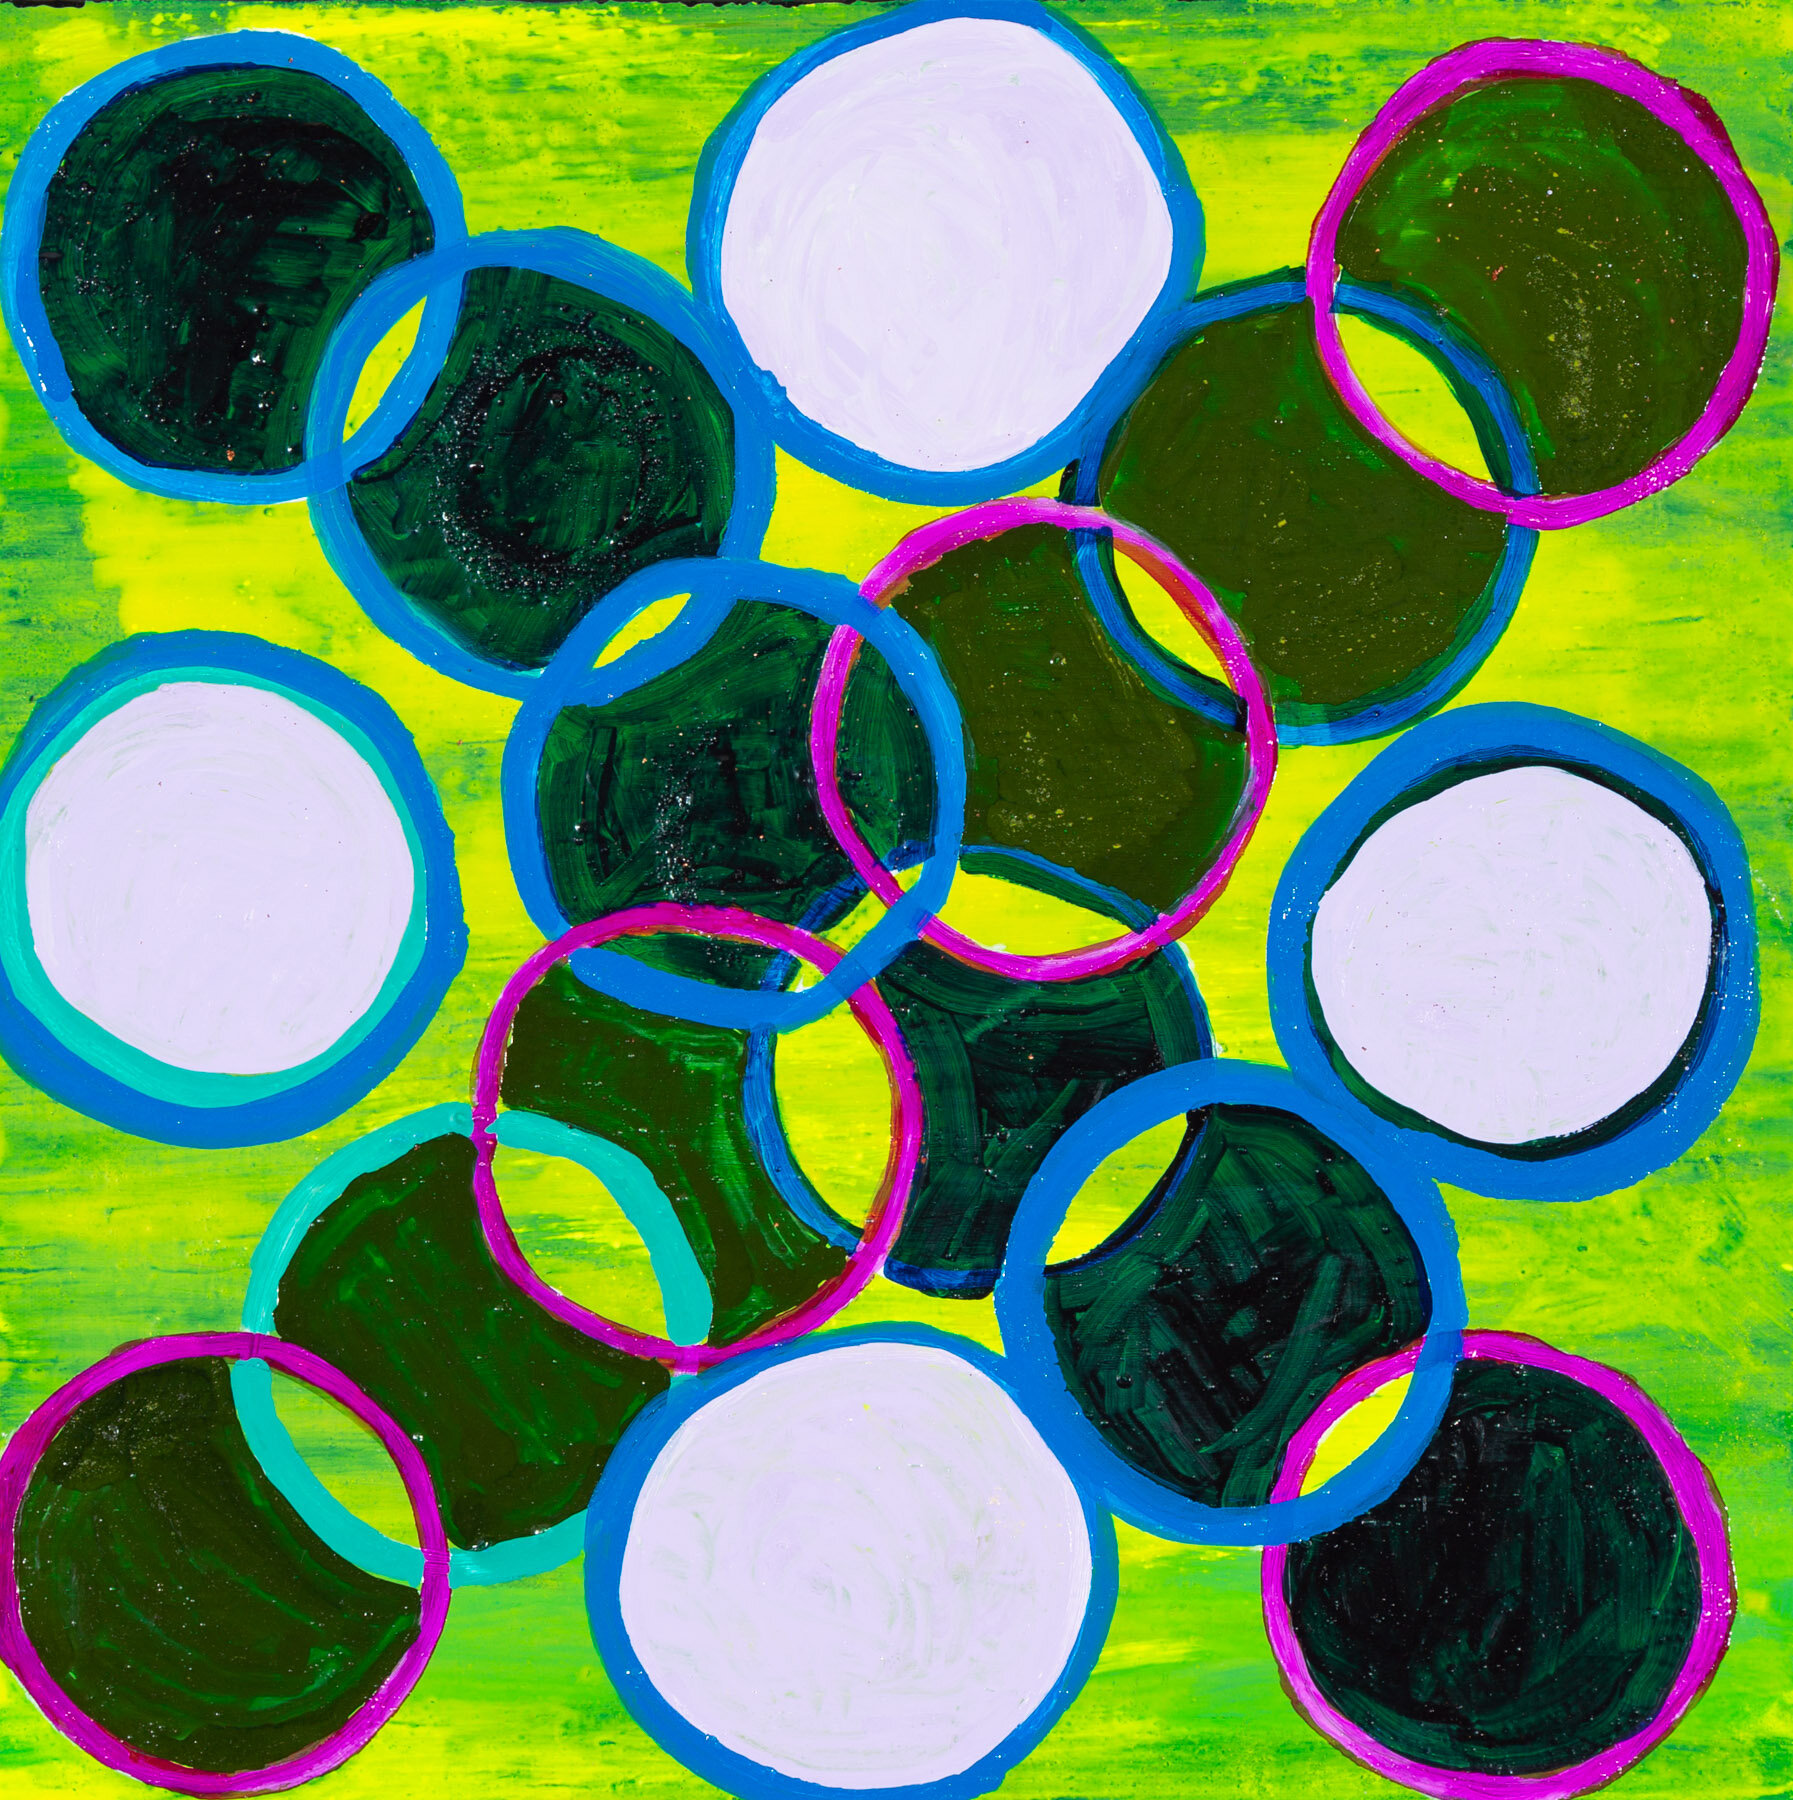 Circles on Florescent Yellow & Green